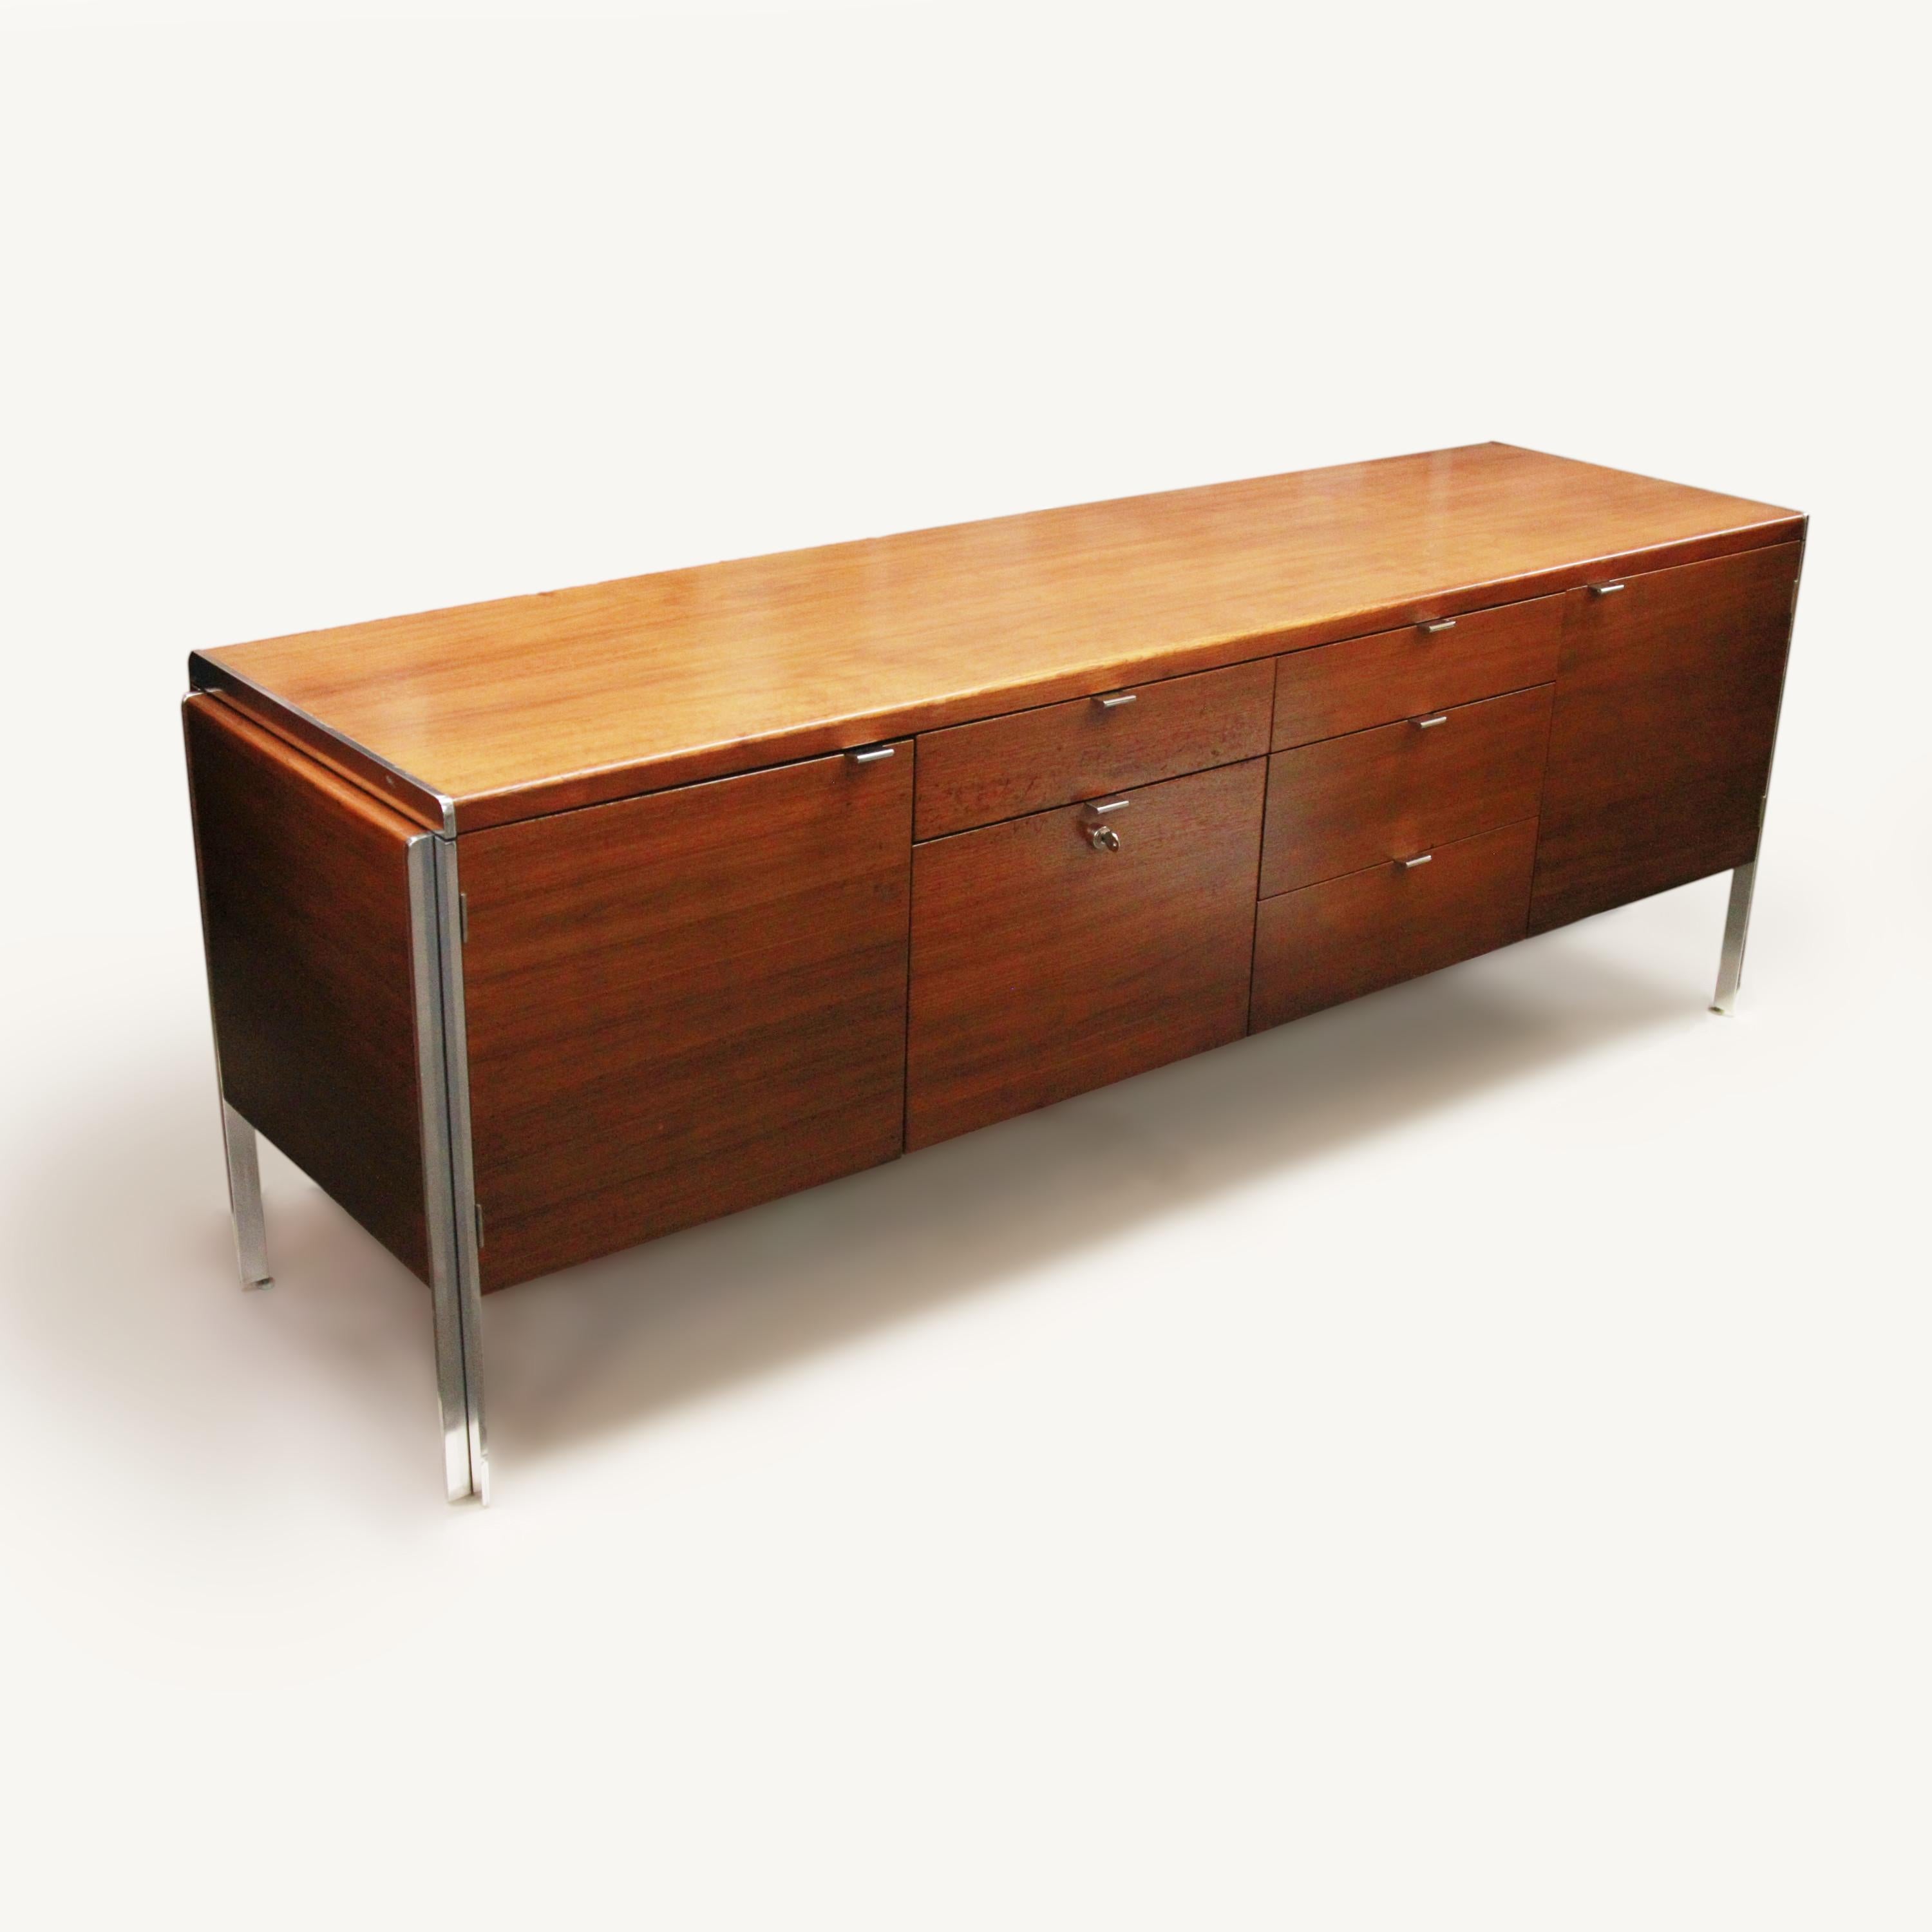 This wonderful Mid-Century Modern credenza by Stow Davis has everything going for it. With its beautifully clean lines by Alexis Yermakov and chrome accents, this credenza is the epitome of 1970s chic. At 74